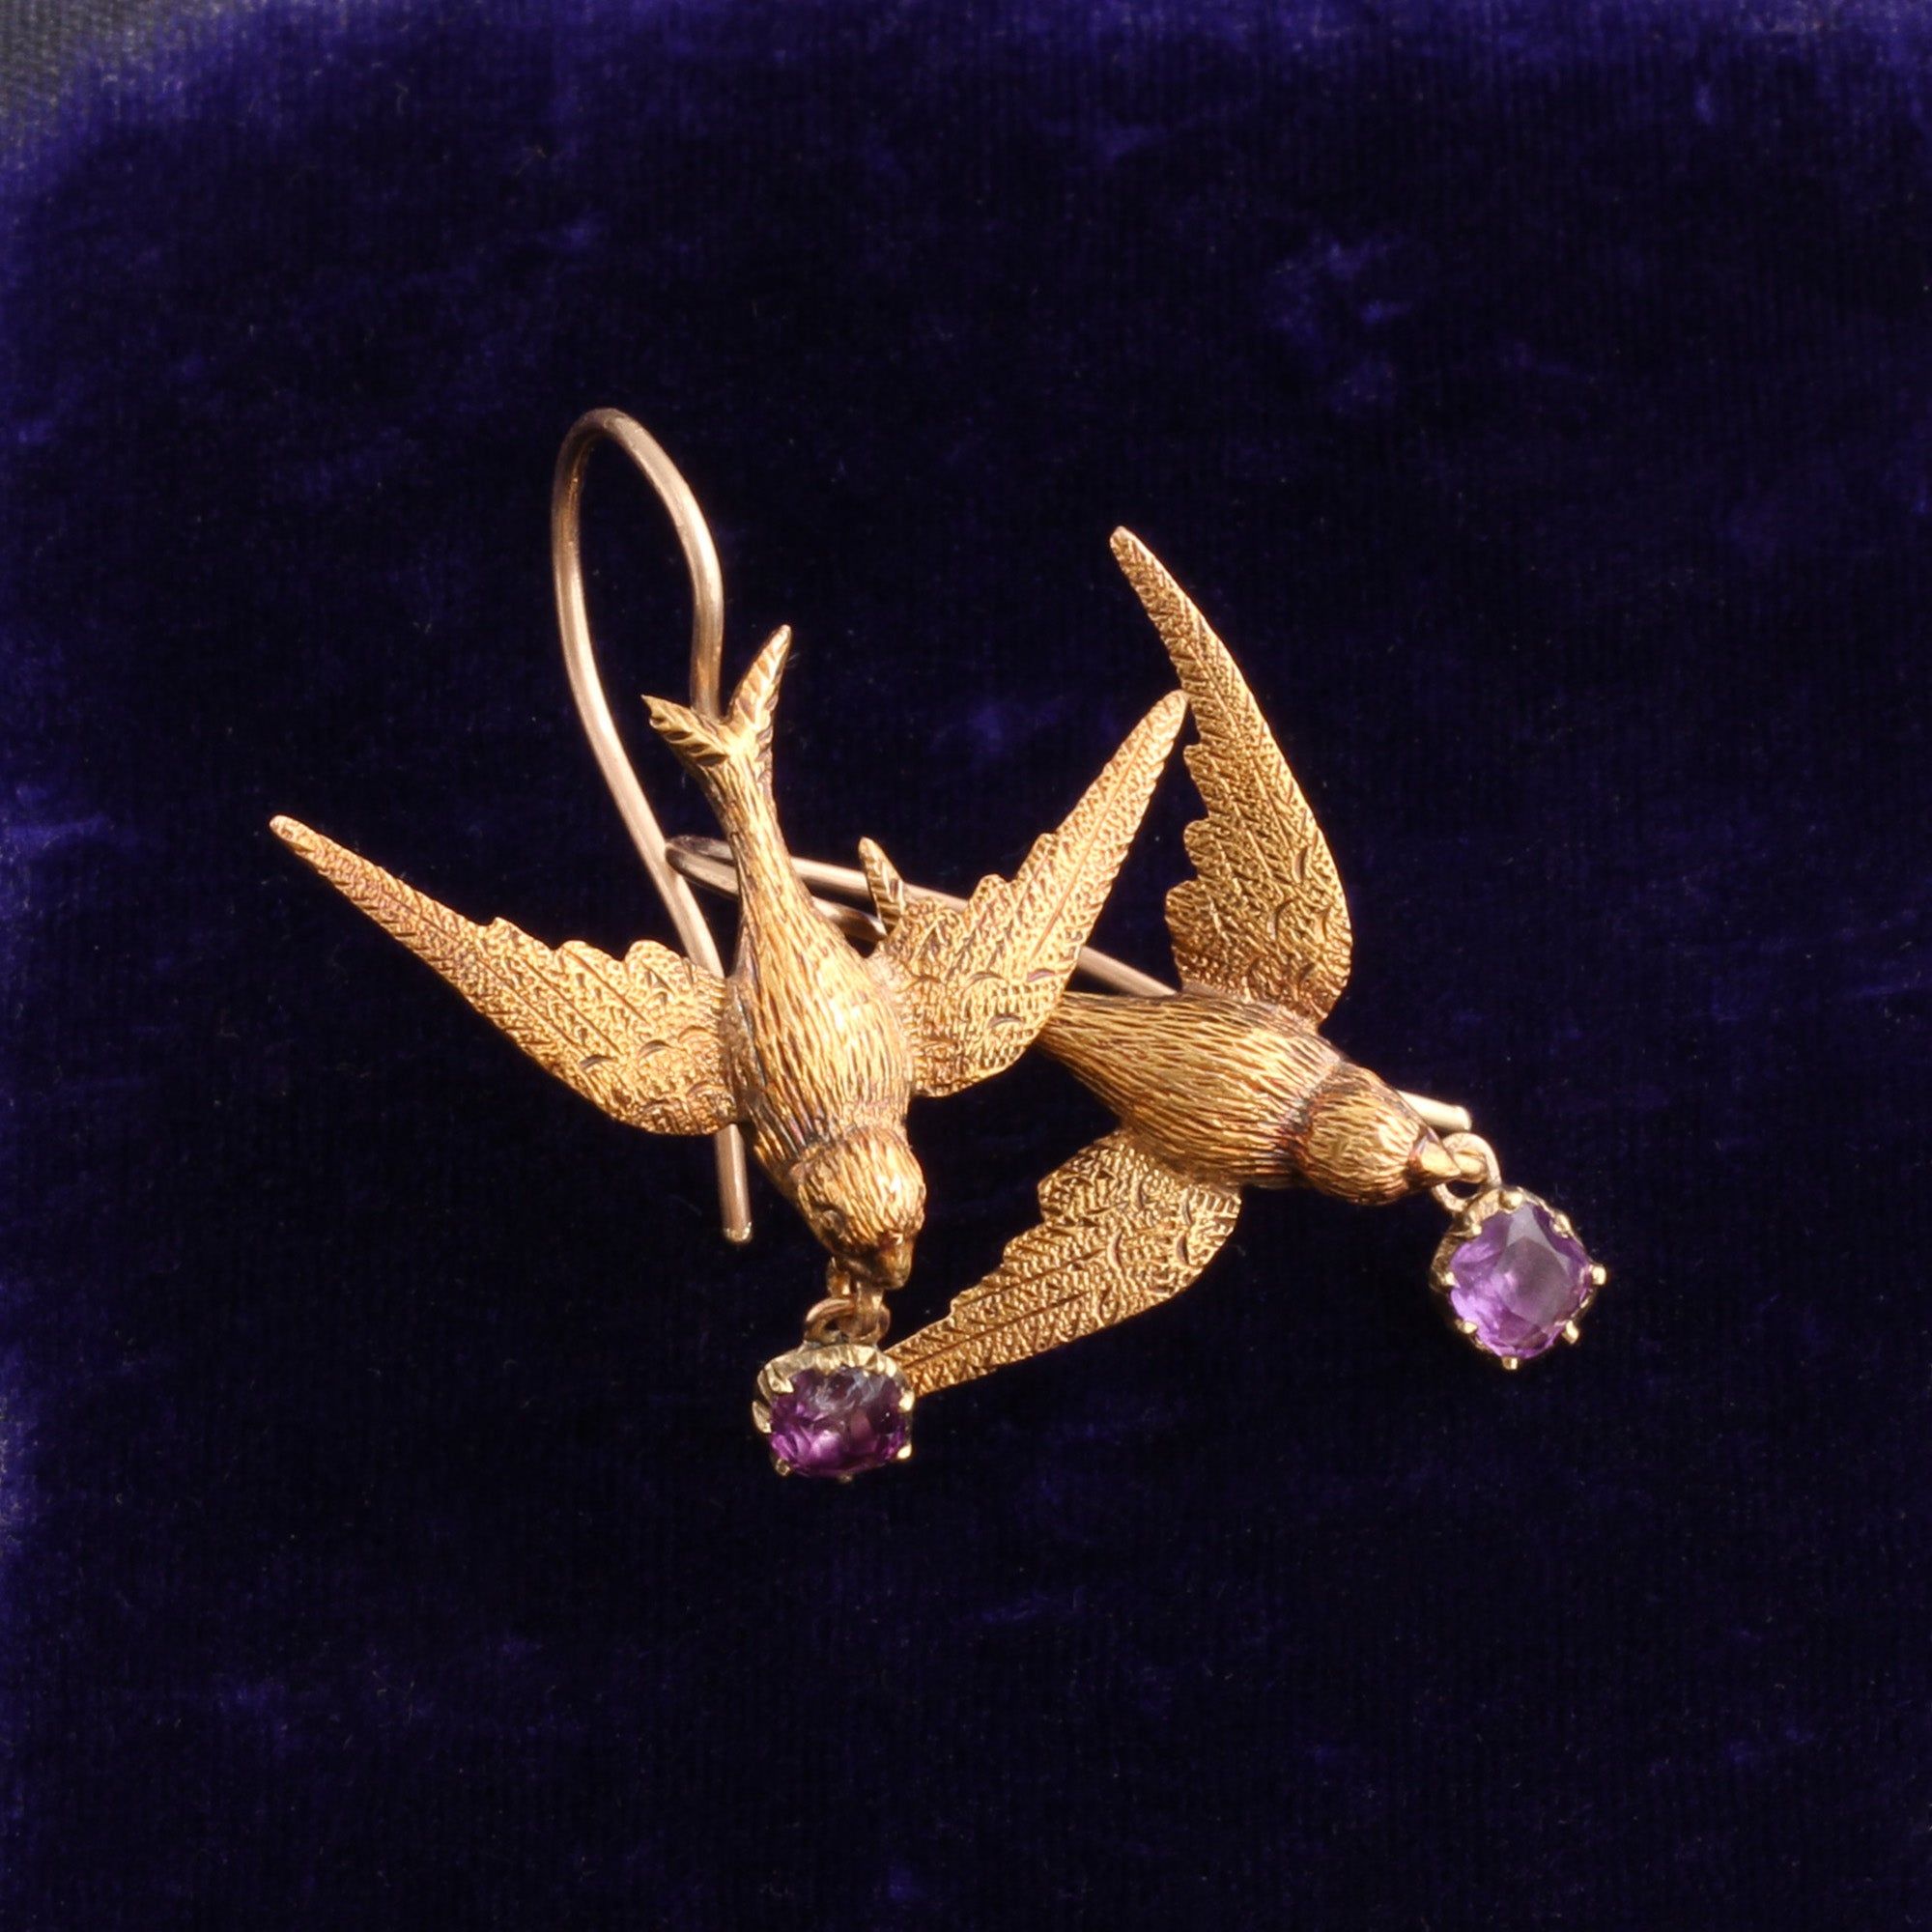 Victorian Swallow Earrings with Pendant Amethysts